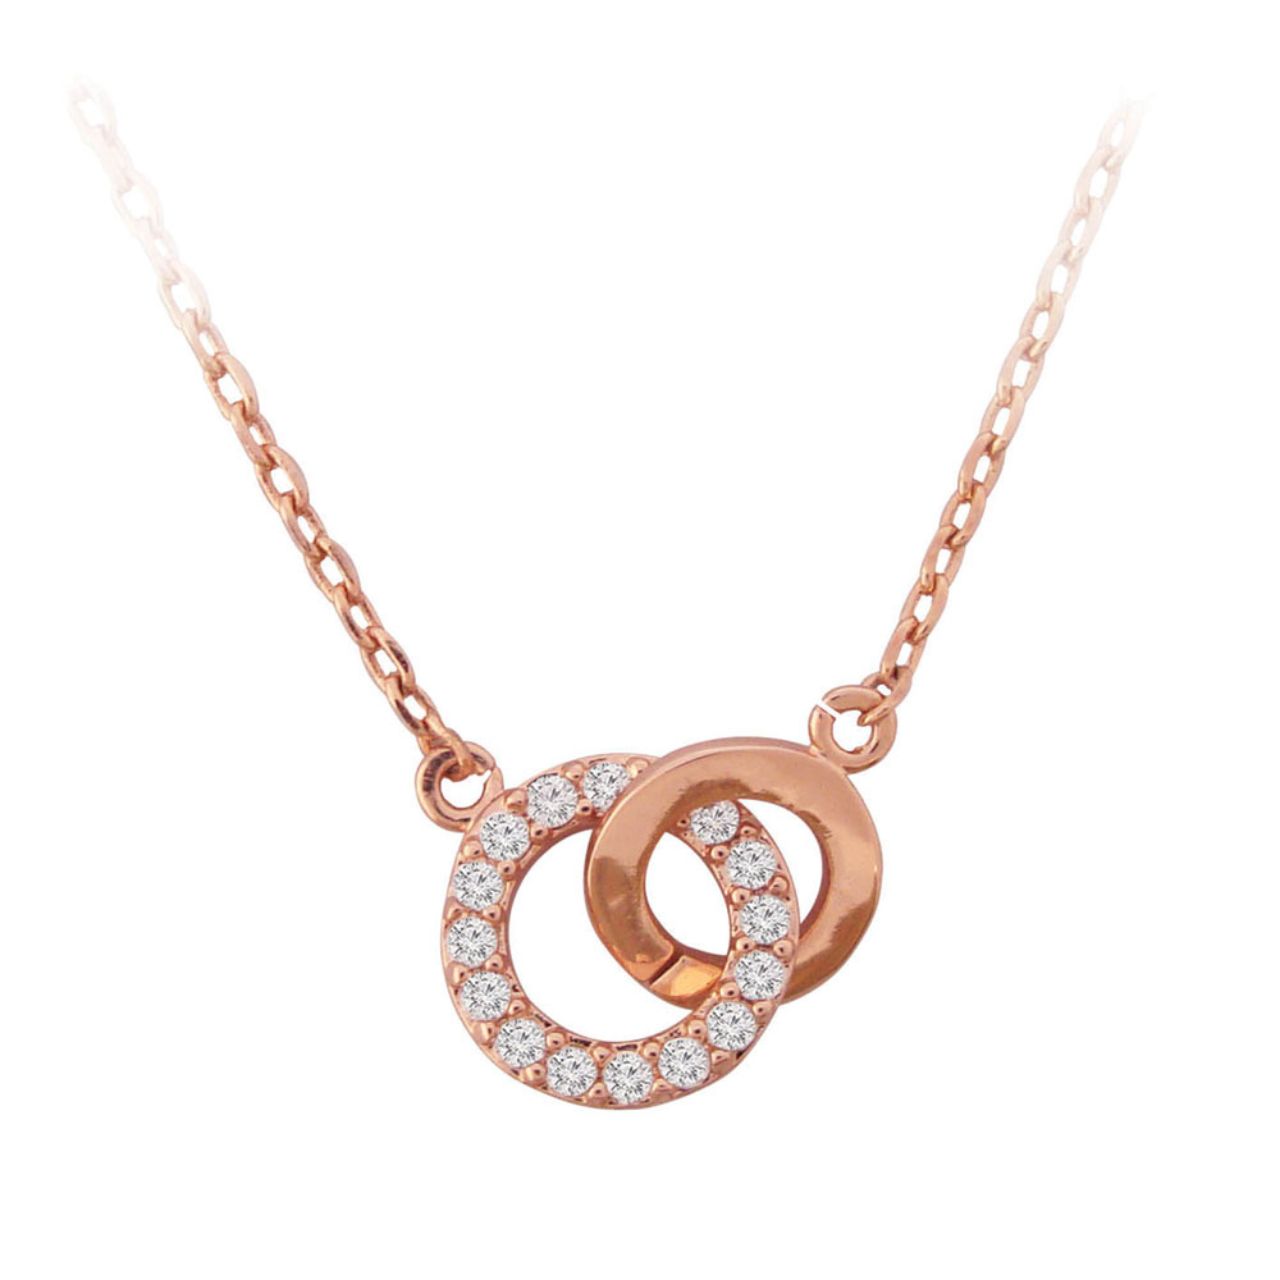 Rose Gold Polished & Crystal Circle Pendant by Tipperary Crystal  Forever sparkling, this symbolic necklace is a glistening symbol of forever love. Fashioned in romantic rose gold the design joins one polished open circle with a larger open circle lined with brilliantly cut round clear crystals.